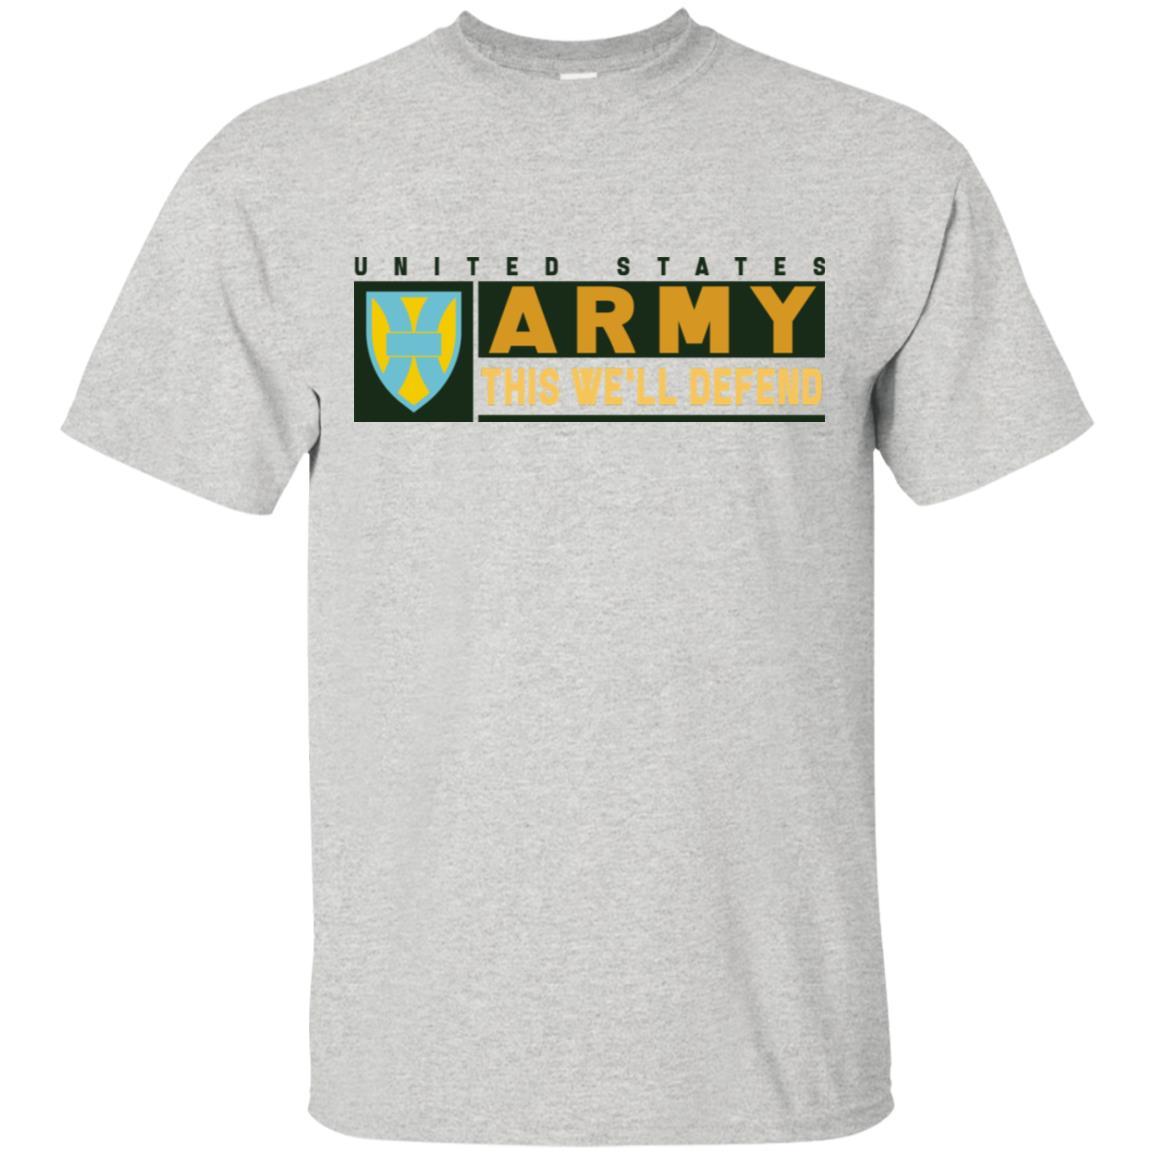 US Army 21ST SUSTAINMENT COMMAND- This We'll Defend T-Shirt On Front For Men-TShirt-Army-Veterans Nation